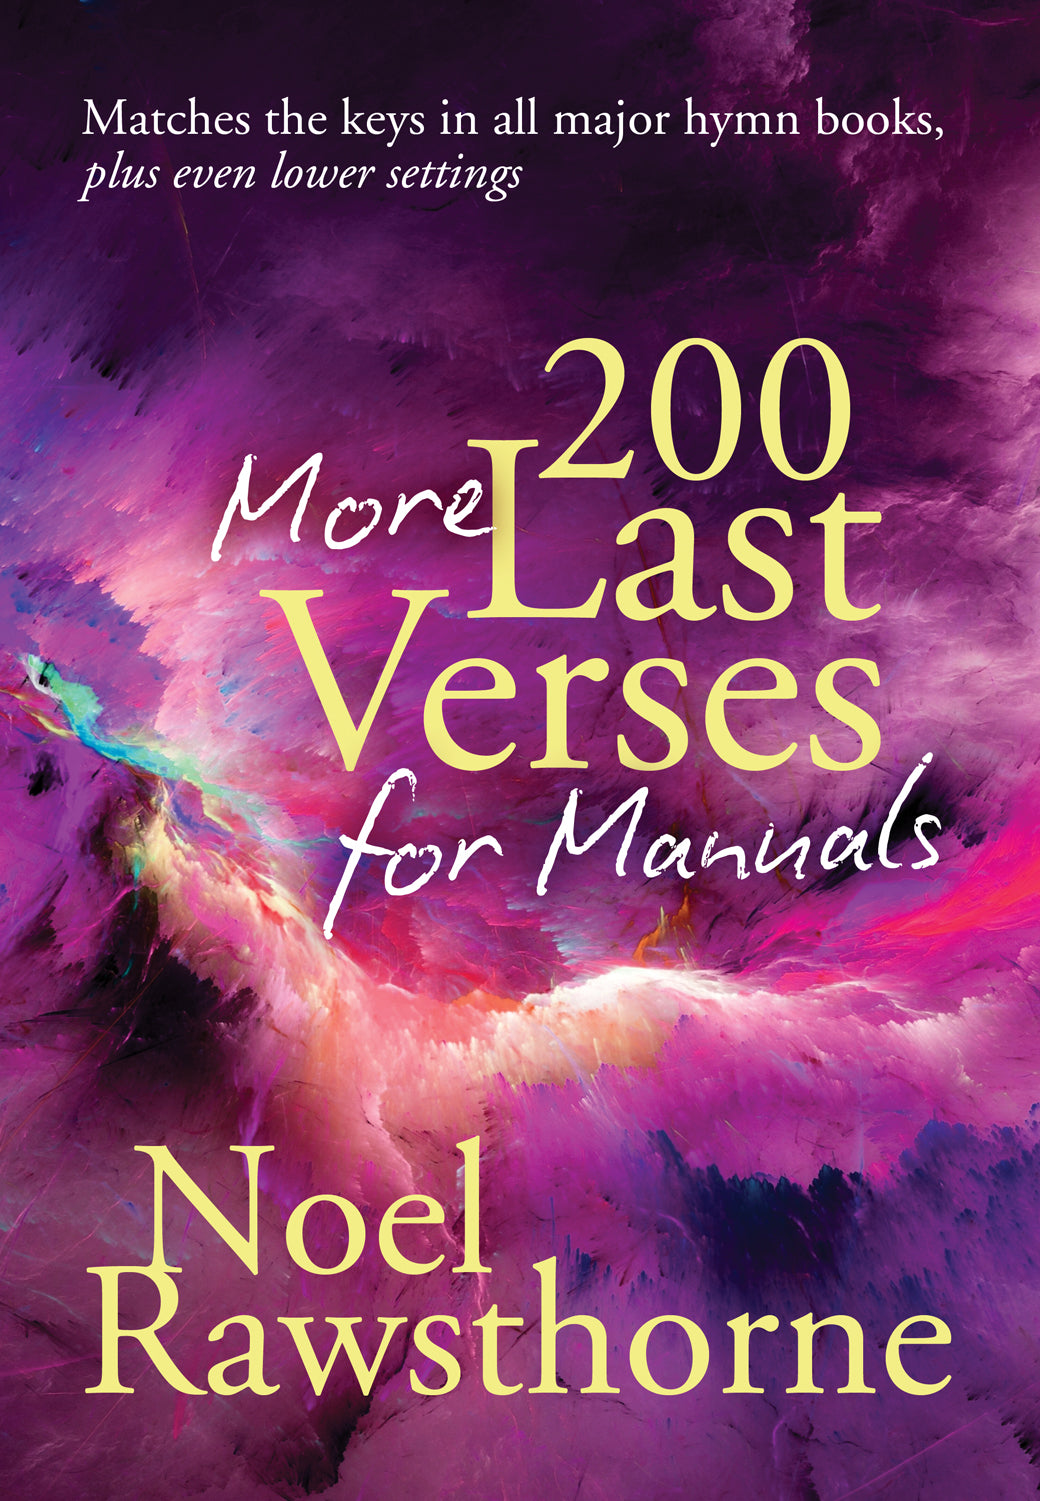 200 More Last Verses For Manuals (Revised)200 More Last Verses For Manuals (Revised)